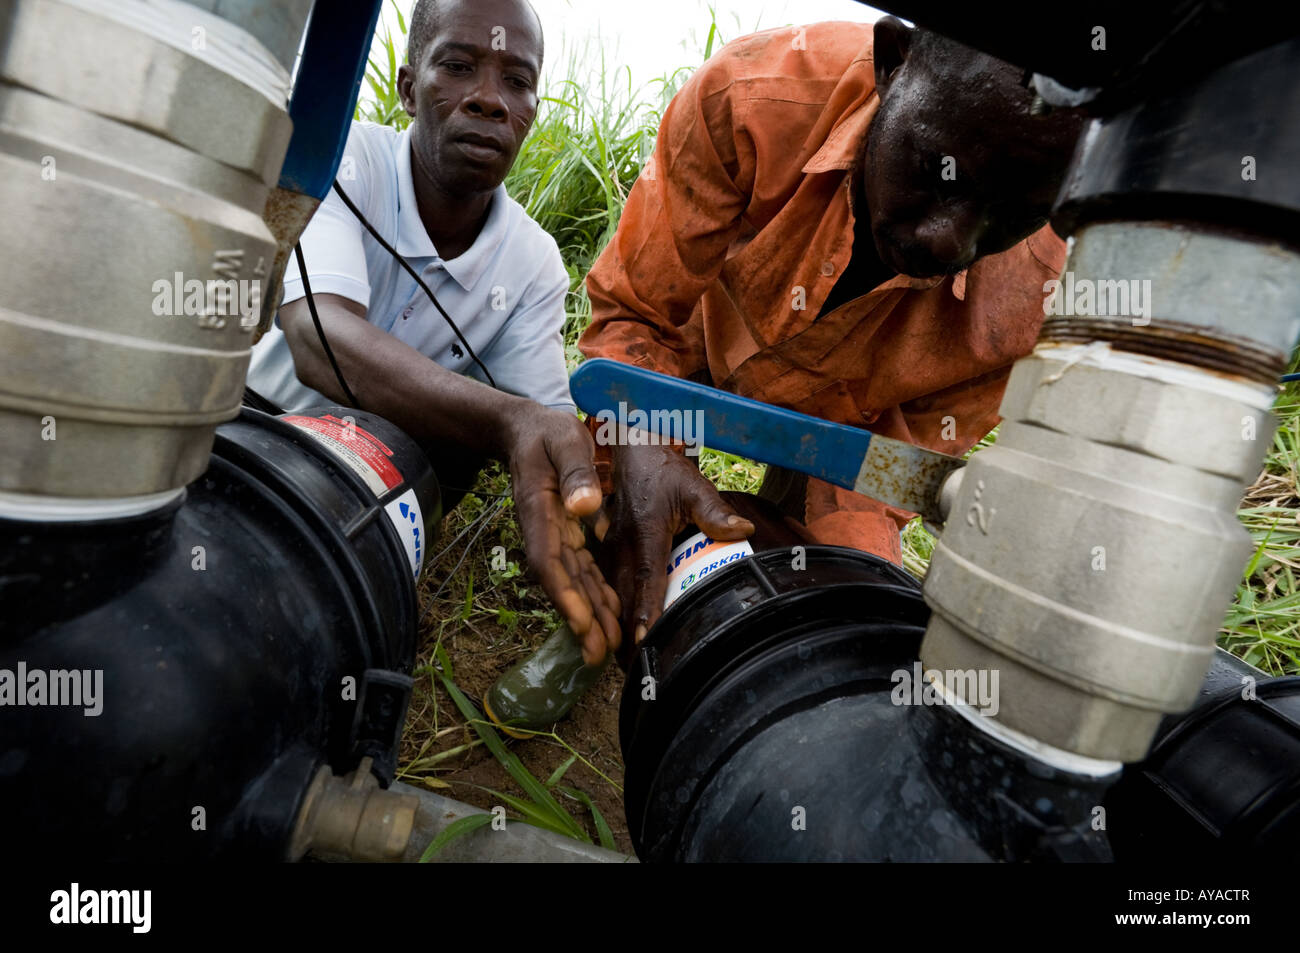 Men cleaning filter on agricultural irrigation system pump Stock Photo